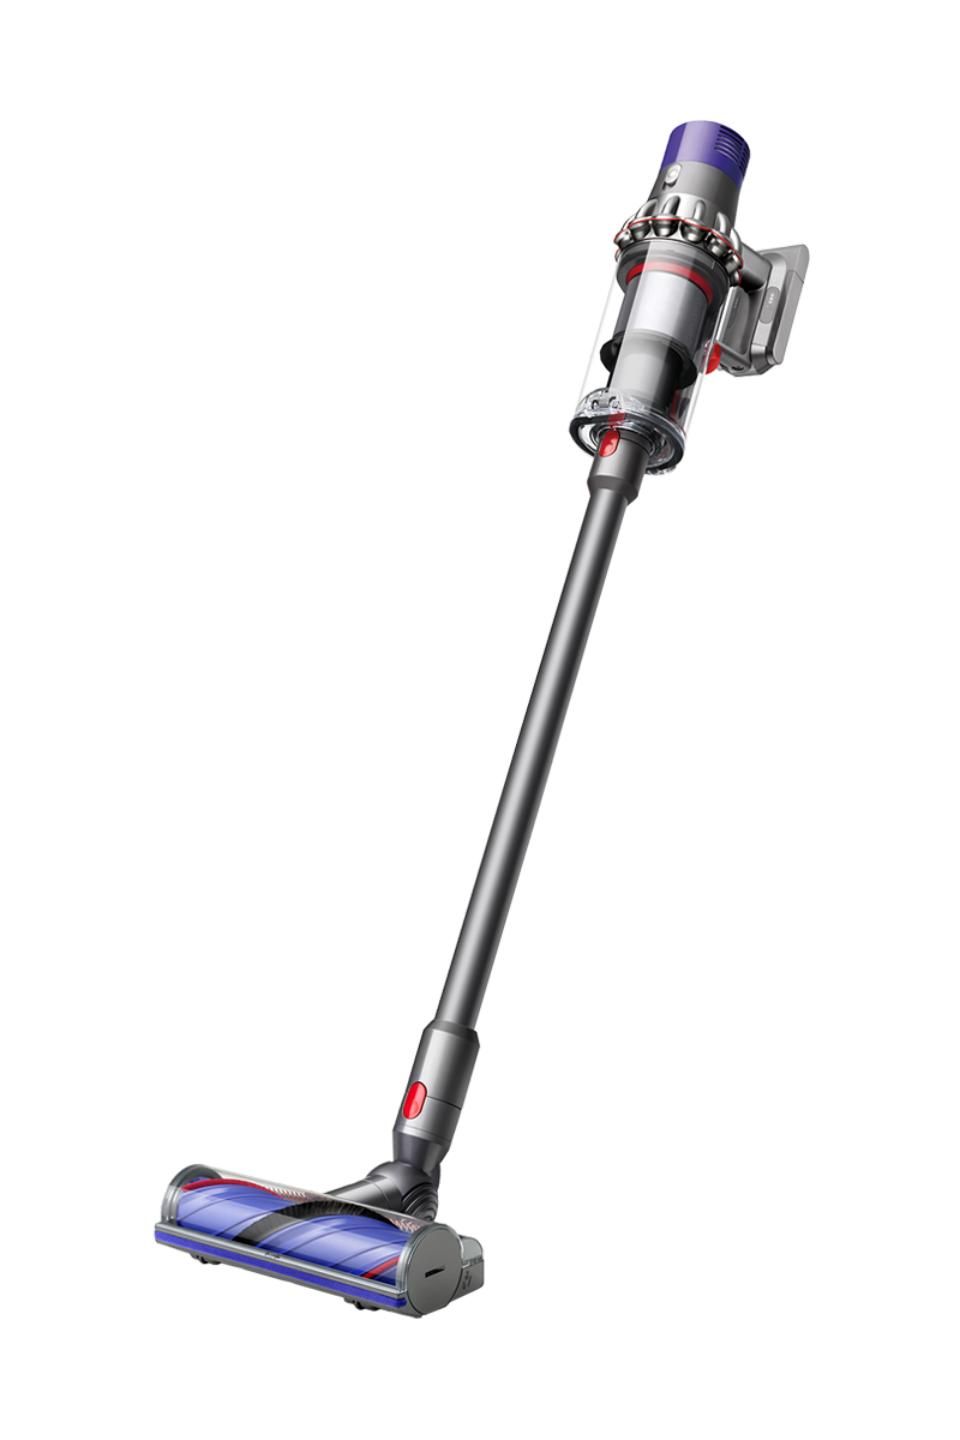 Passiv Downtown St Dyson V8 vs. V10: The difference between the two cordless vacuums